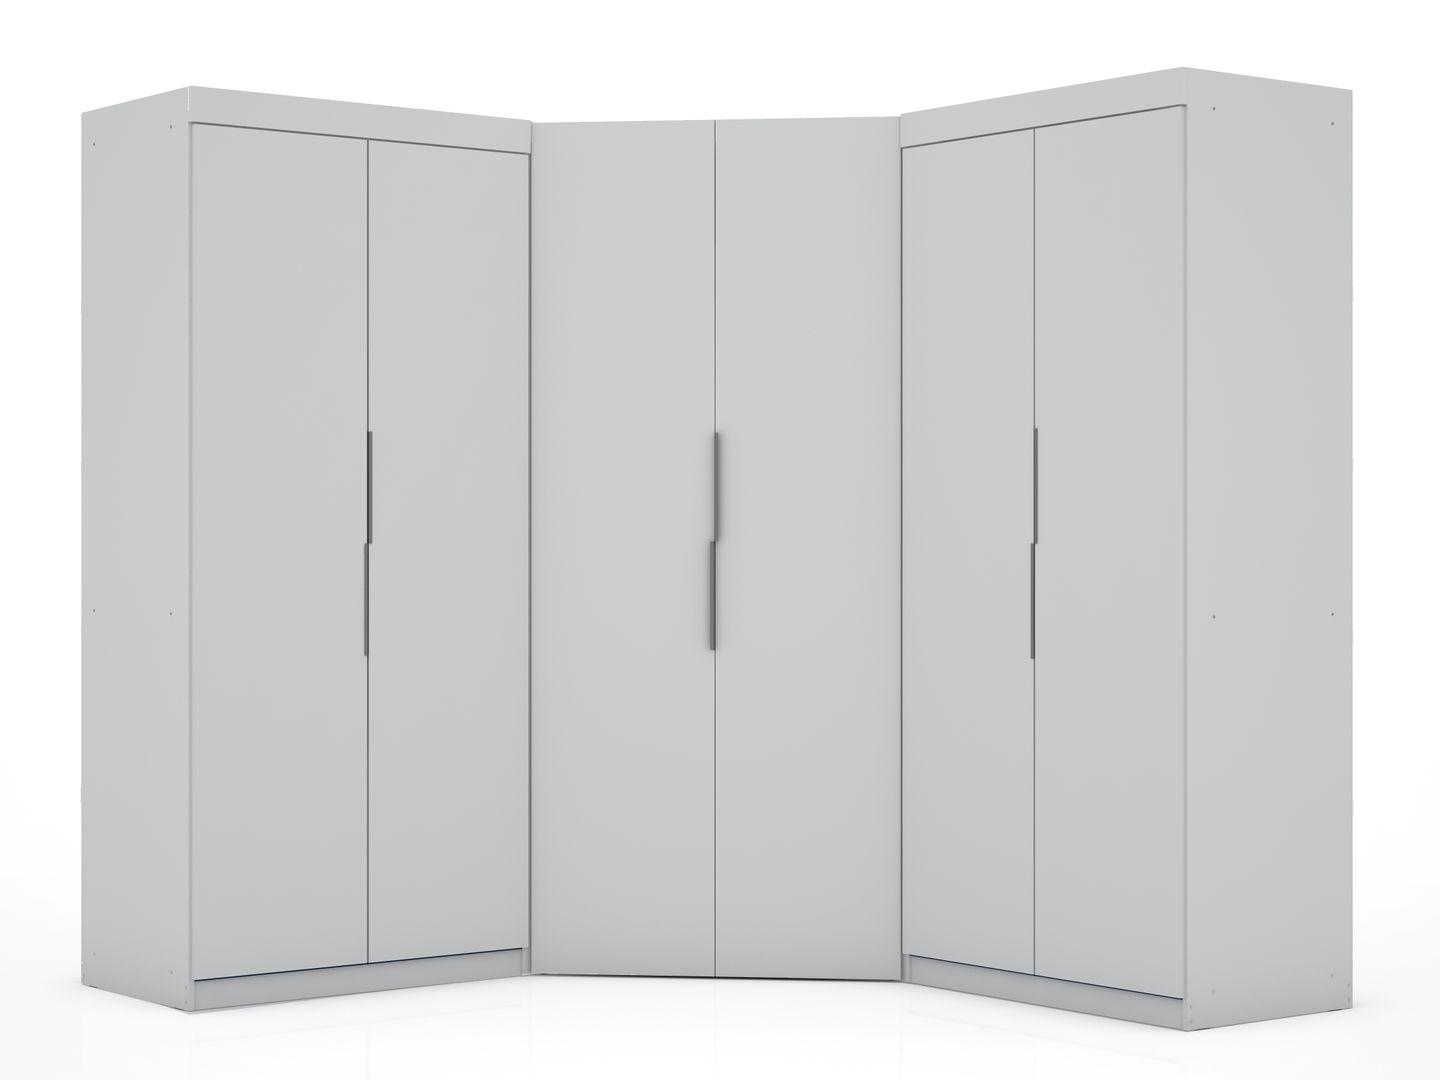 Manhattan Comfort Mulberry 3.0 Sectional Modern Wardrobe Corner Closet with 4 Drawers - Set of 3 in WhiteManhattan Comfort-Armoires and Wardrobes - - 1